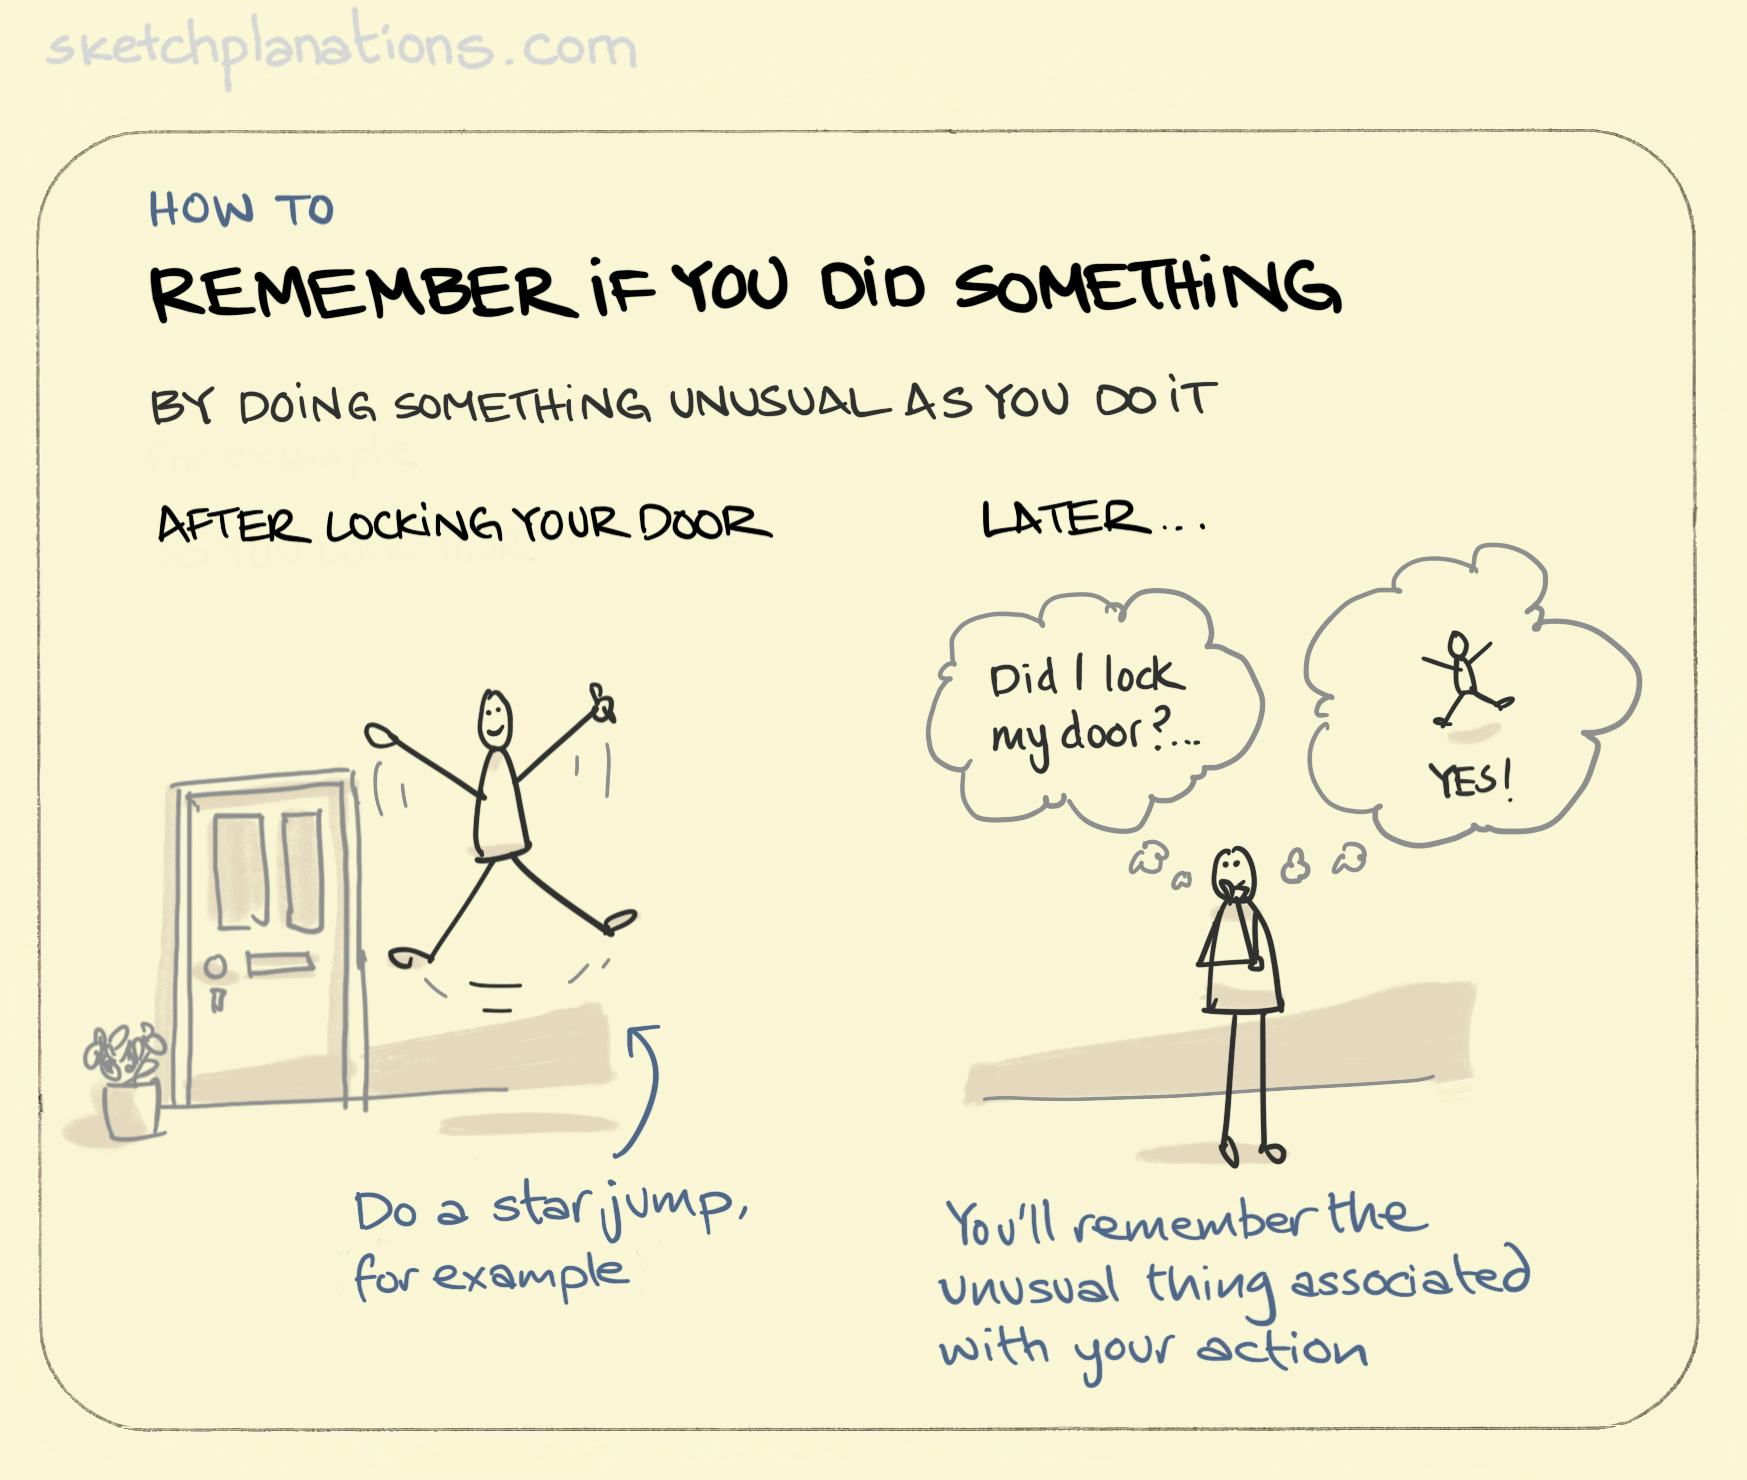 How to remember if you did something - Sketchplanations